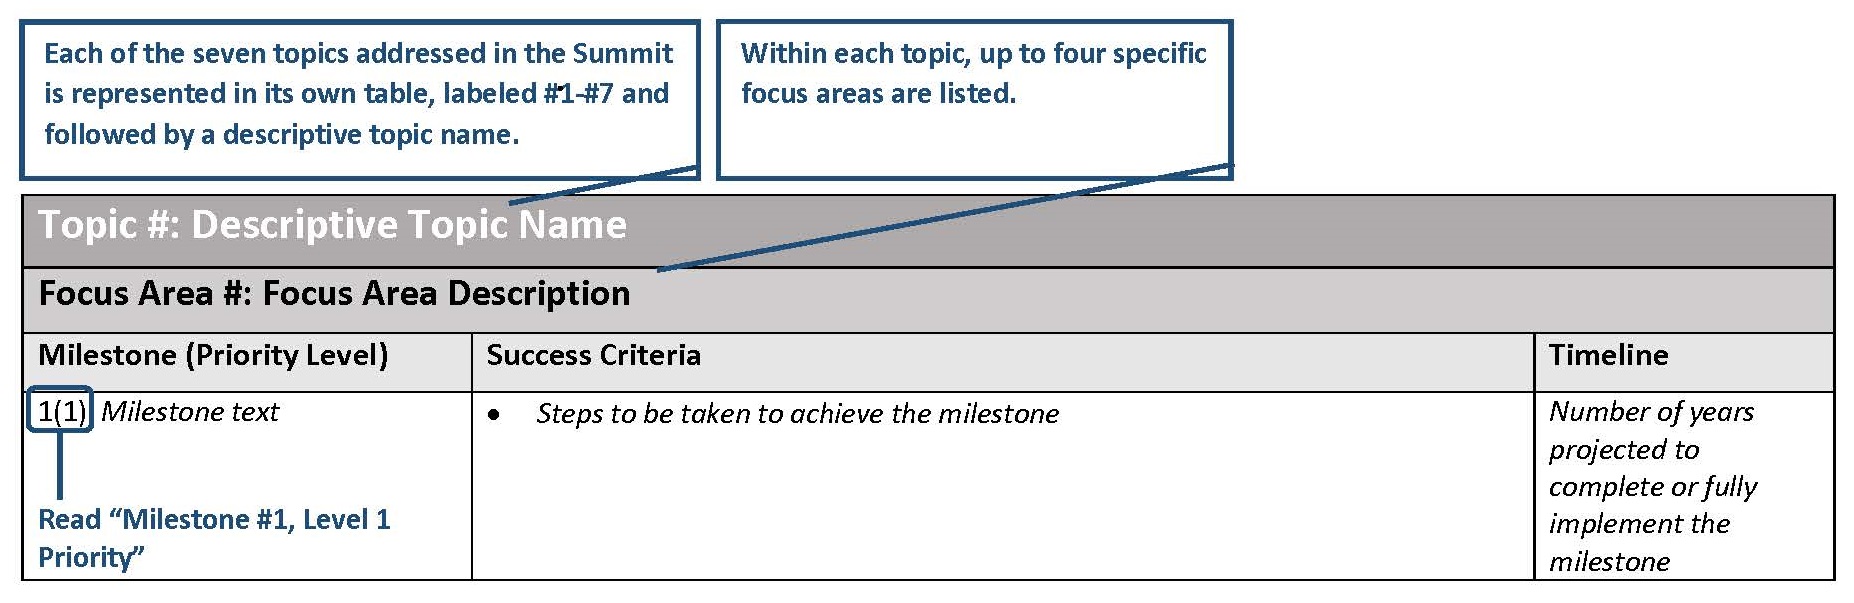 Each topic has it's own table. There are up to 4 focuses per topic. Column 1 of each table shows the Milestone and Priority Level; for example, 1(1) would be Milestone 1, Level 1 Priority. Column 2 shows the Success Criteria; the steps to be taken to achieve the milestone. Column 3 shows the Timeline; the number of years projected to complete or fully implement the milestone. WIDTH=